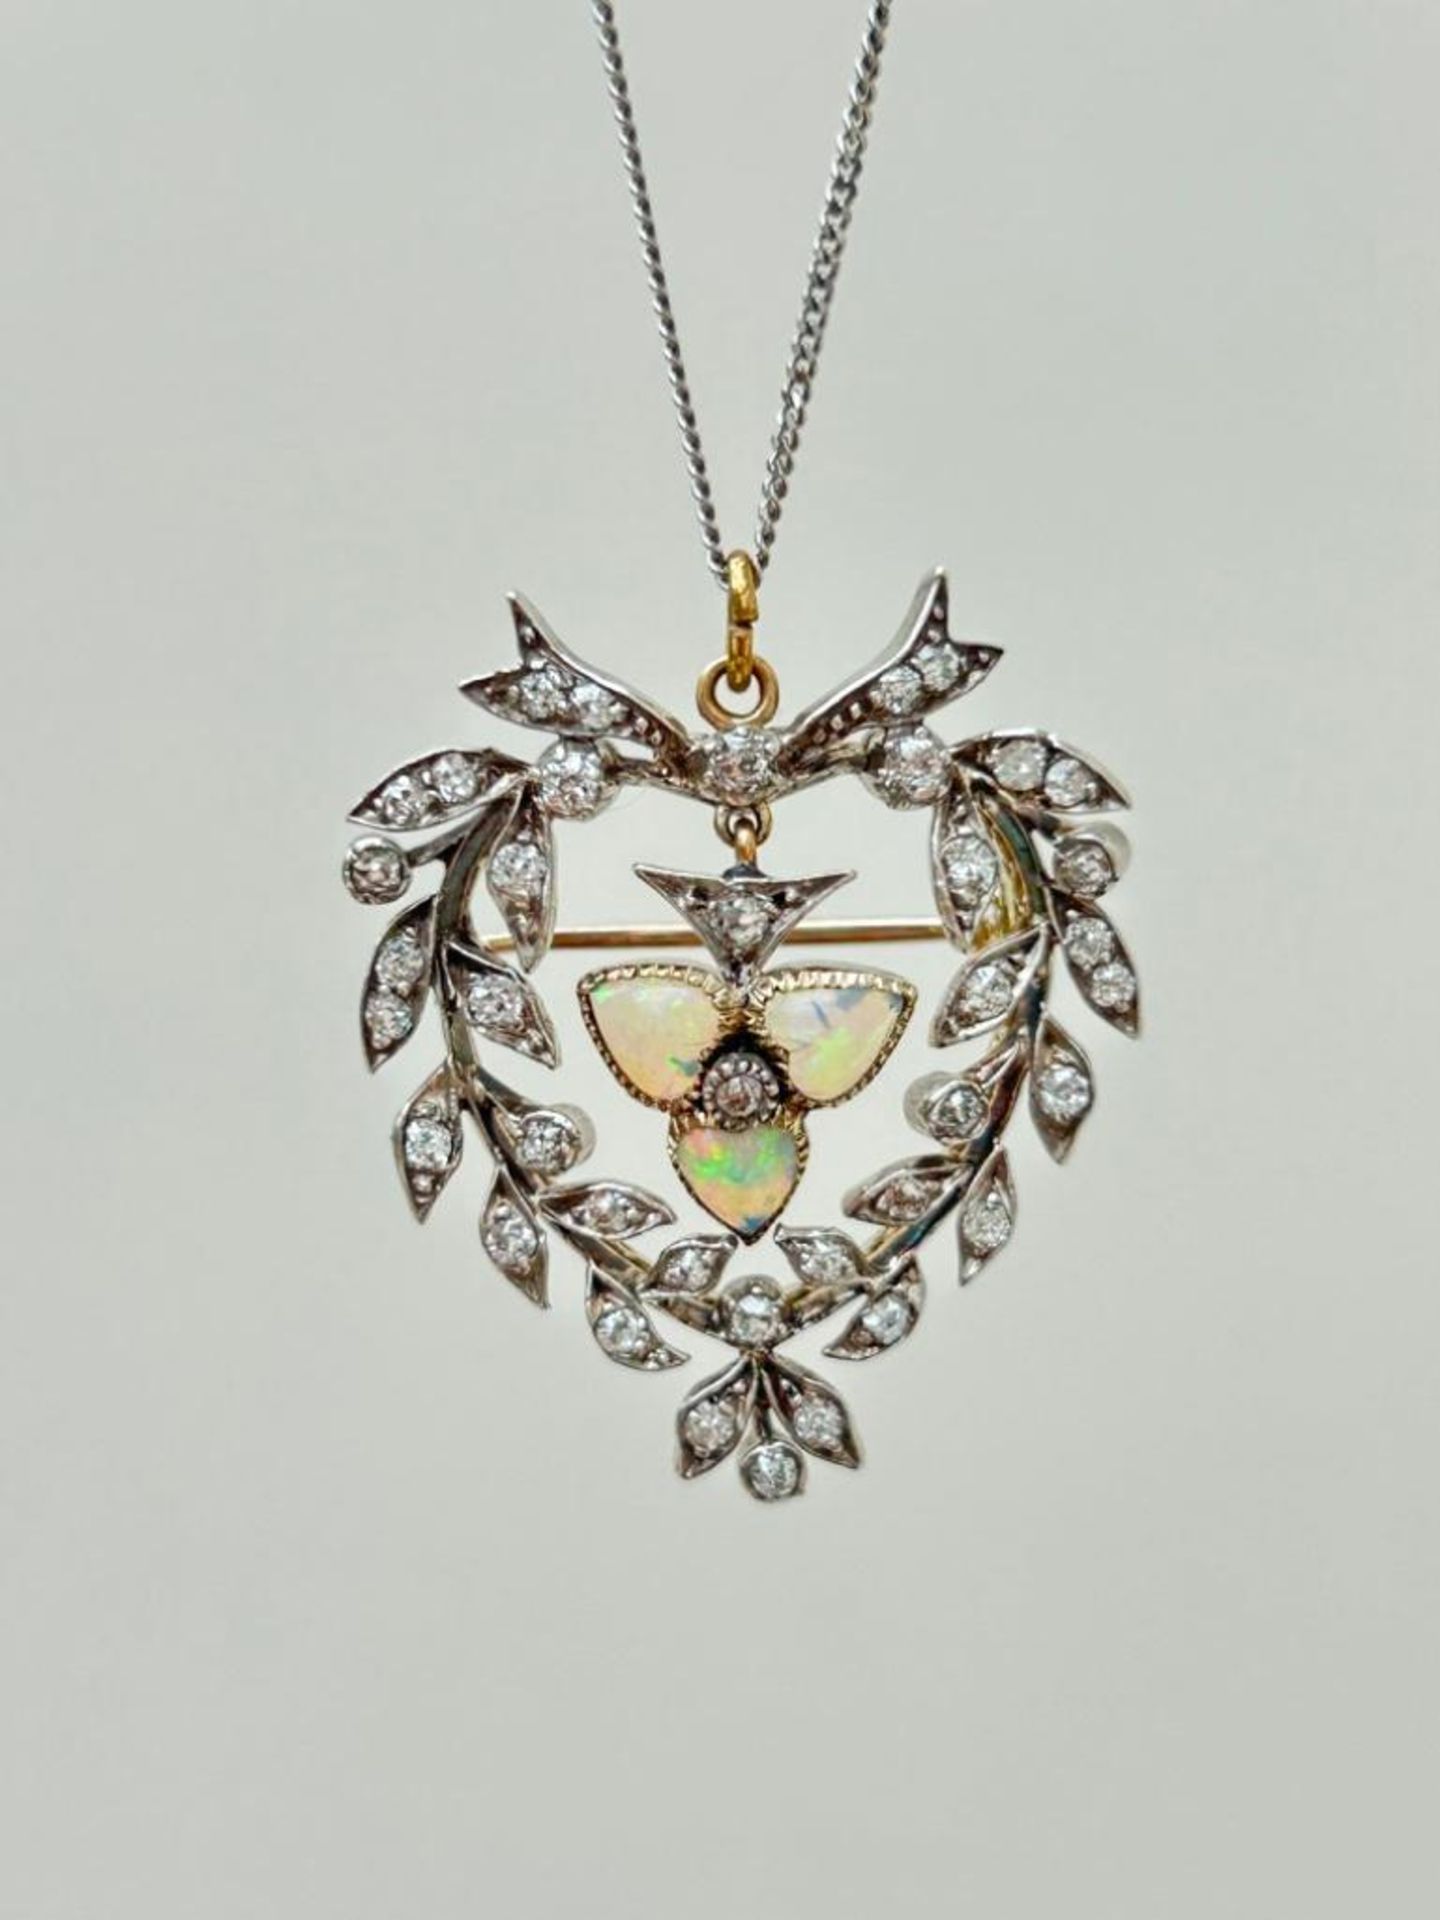 Incredible Antique Opal and Diamond Pendant on Platinum Chain in Original Fitted Box - Image 3 of 11